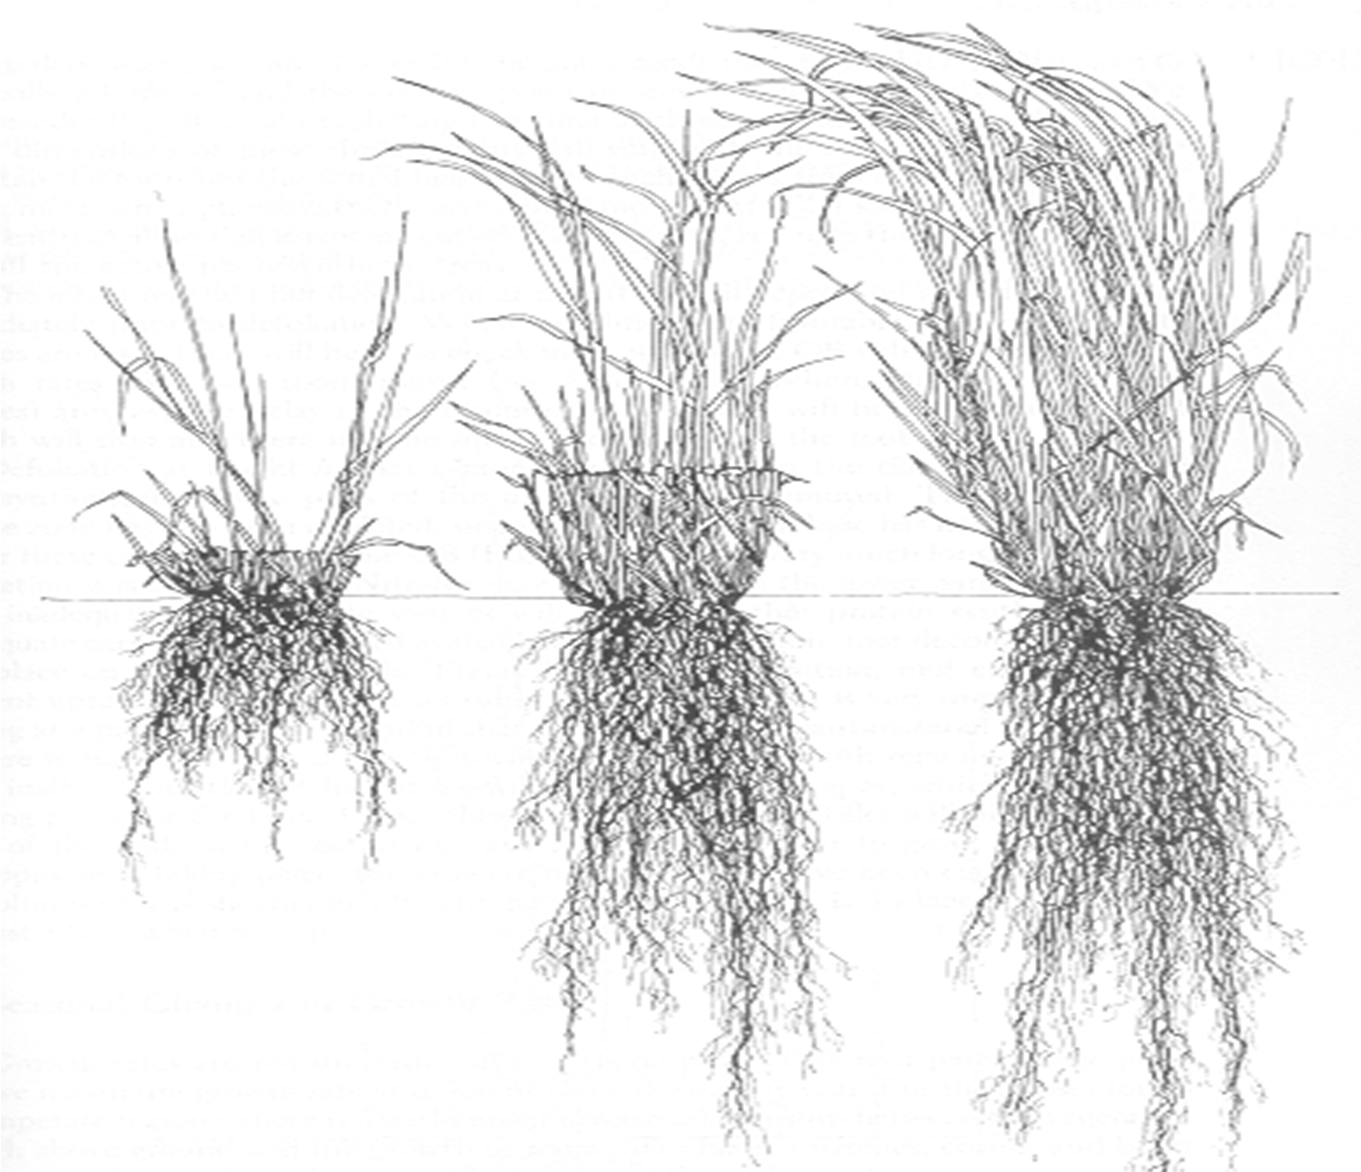 Illustration of three root systems